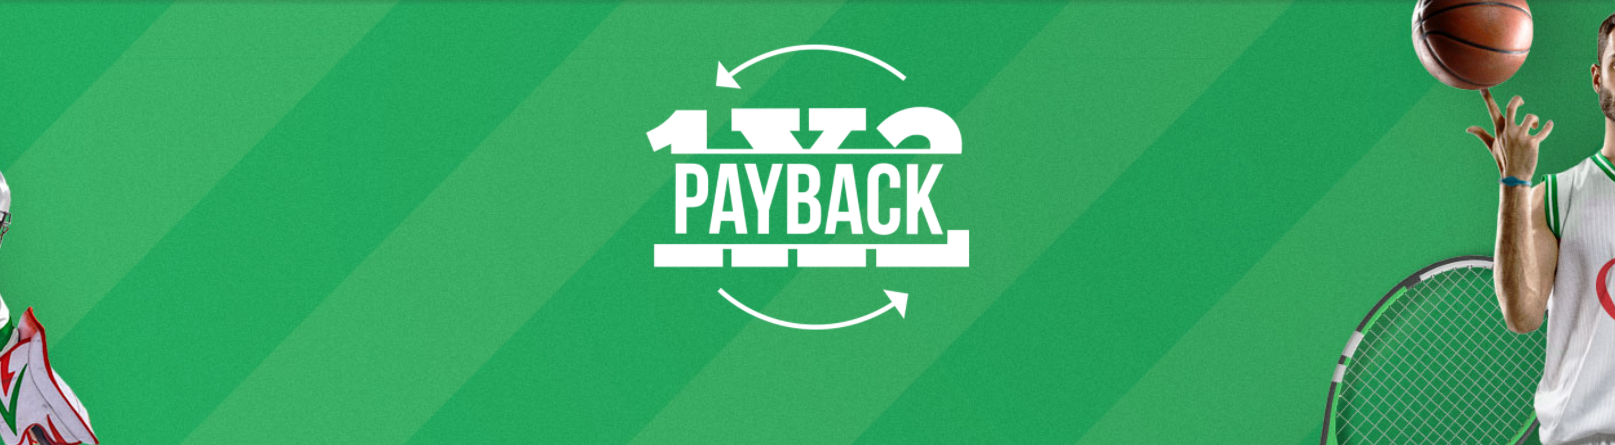 bookmaker paf sports payback offer